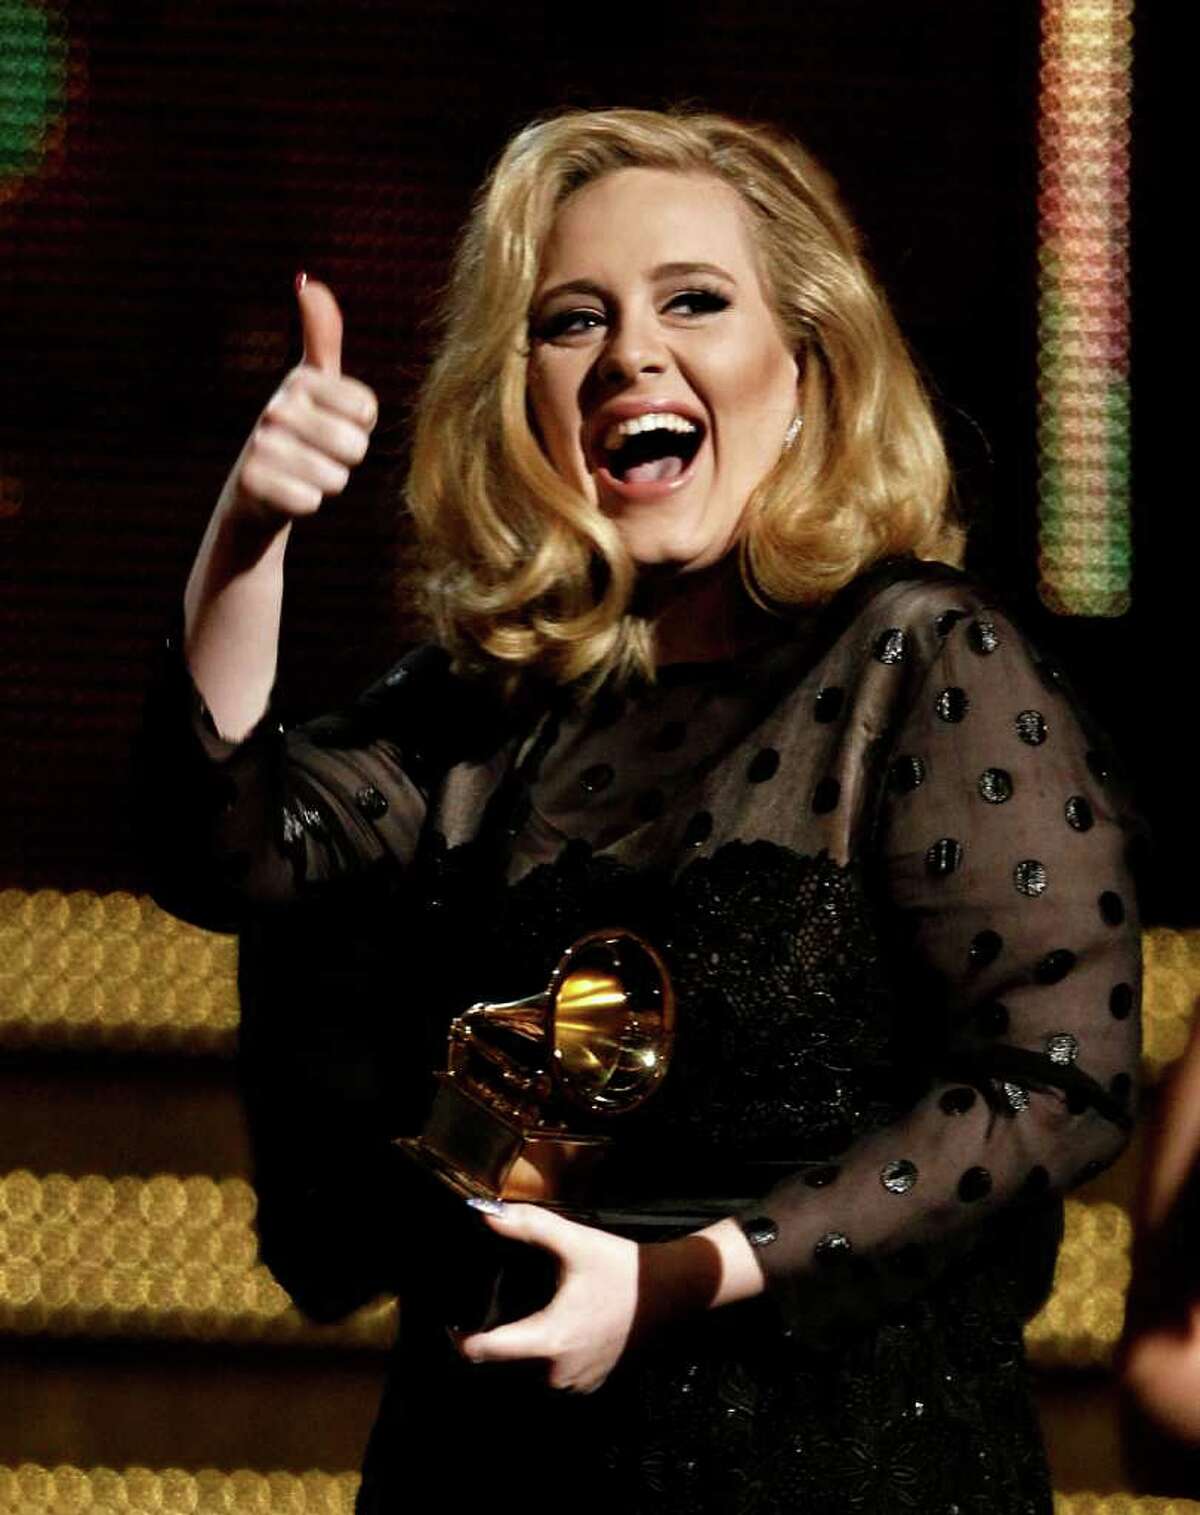 Adele accepts the award for record of the year for "Rolling in the Deep" during the 54th annual Grammy Awards on Sunday, Feb. 12, 2012 in Los Angeles. (AP Photo/Matt Sayles)